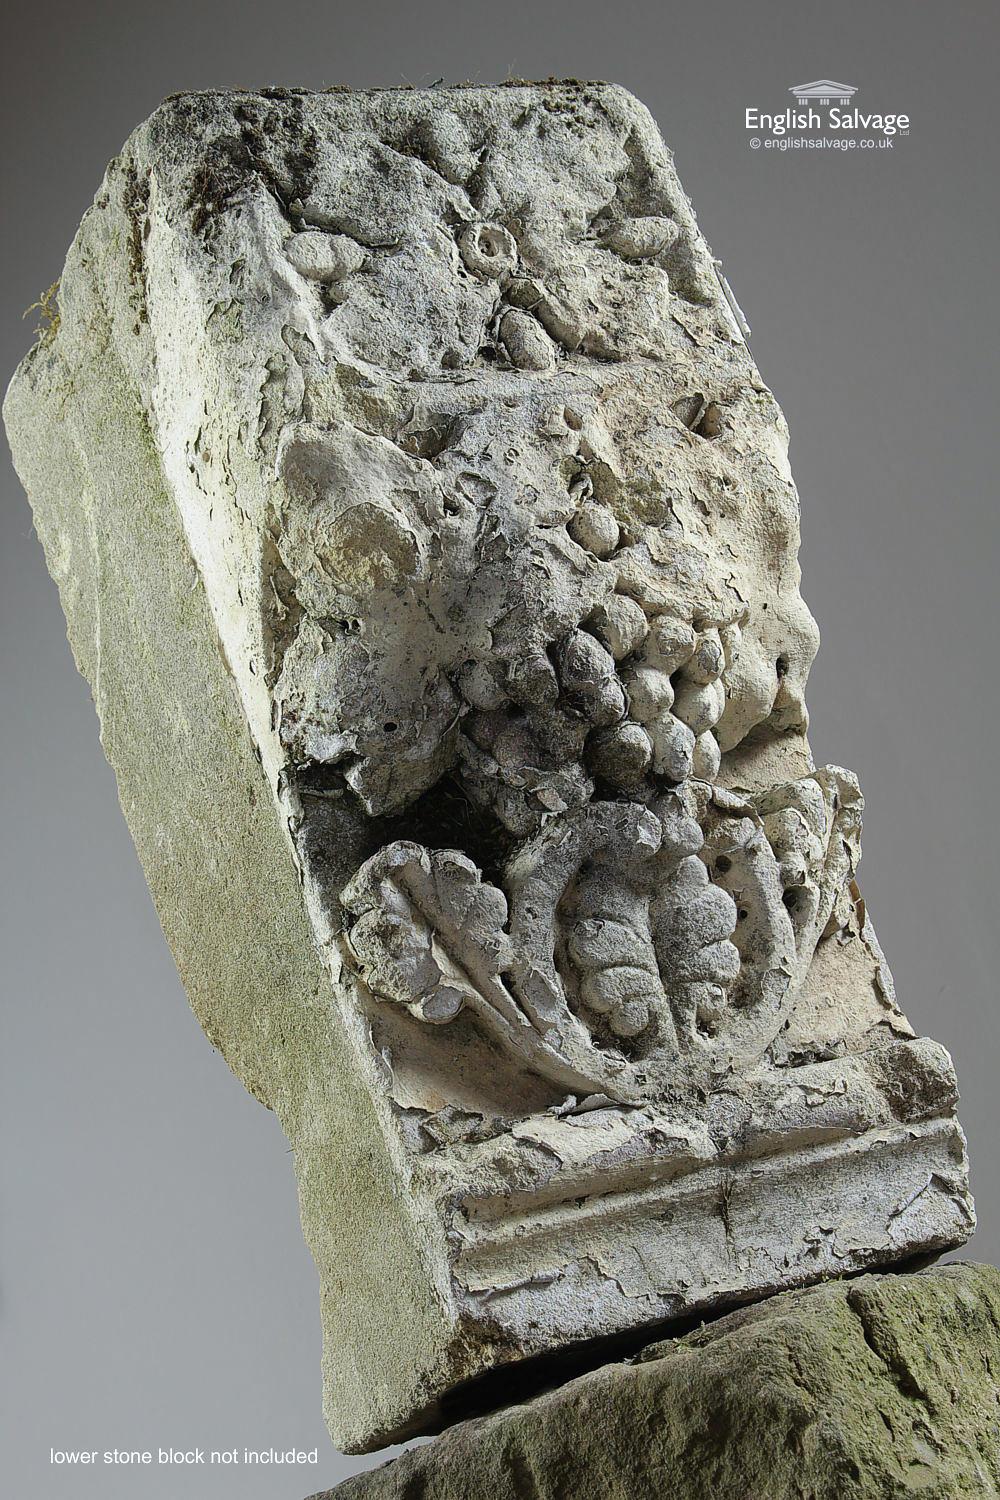 European Salvaged Carved Stone Decorative Corbel, 20th Century For Sale